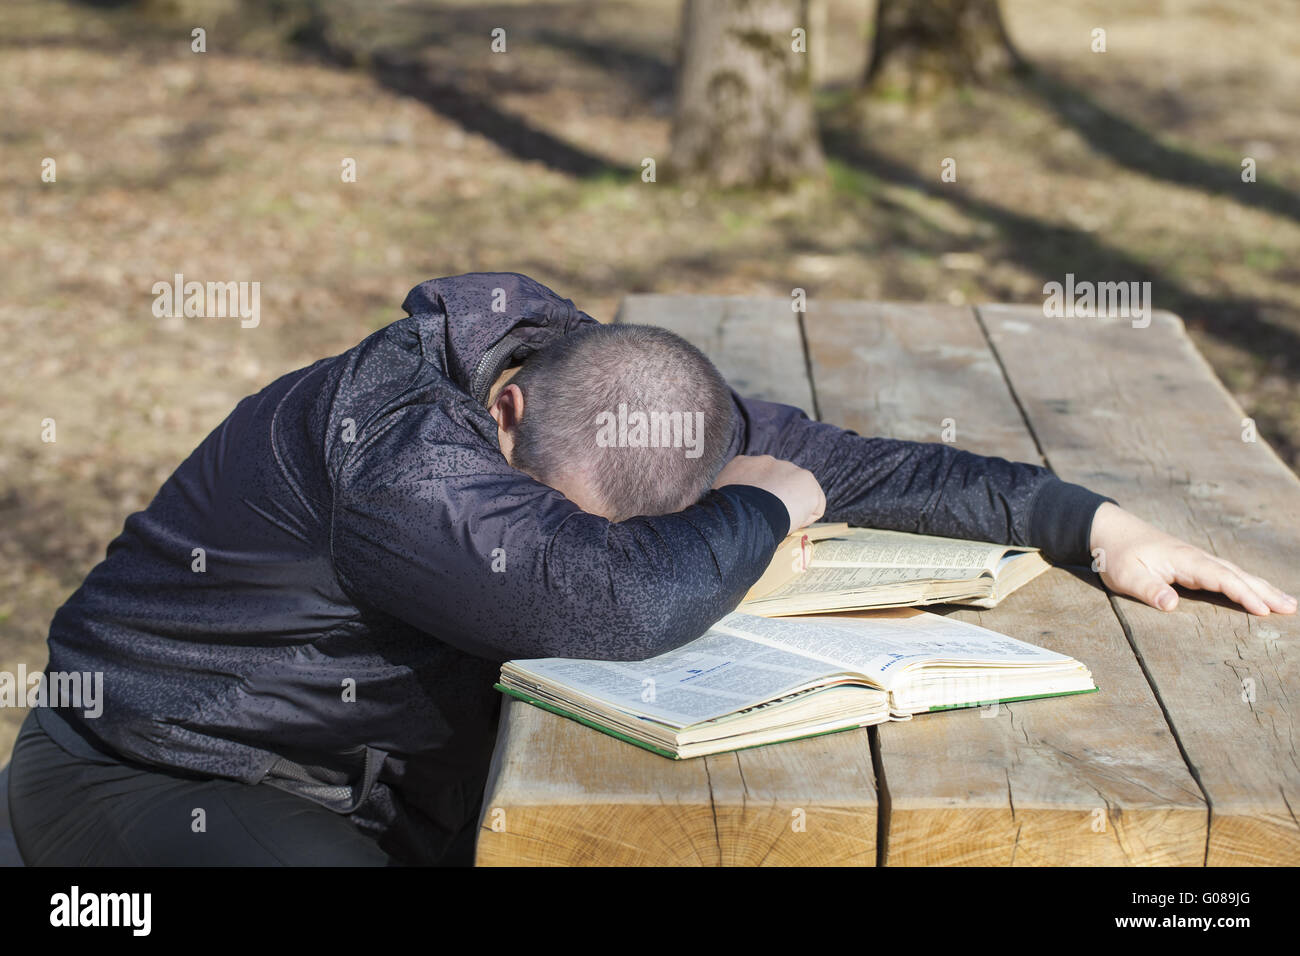 Student lying asleep on books outside on a bench Stock Photo